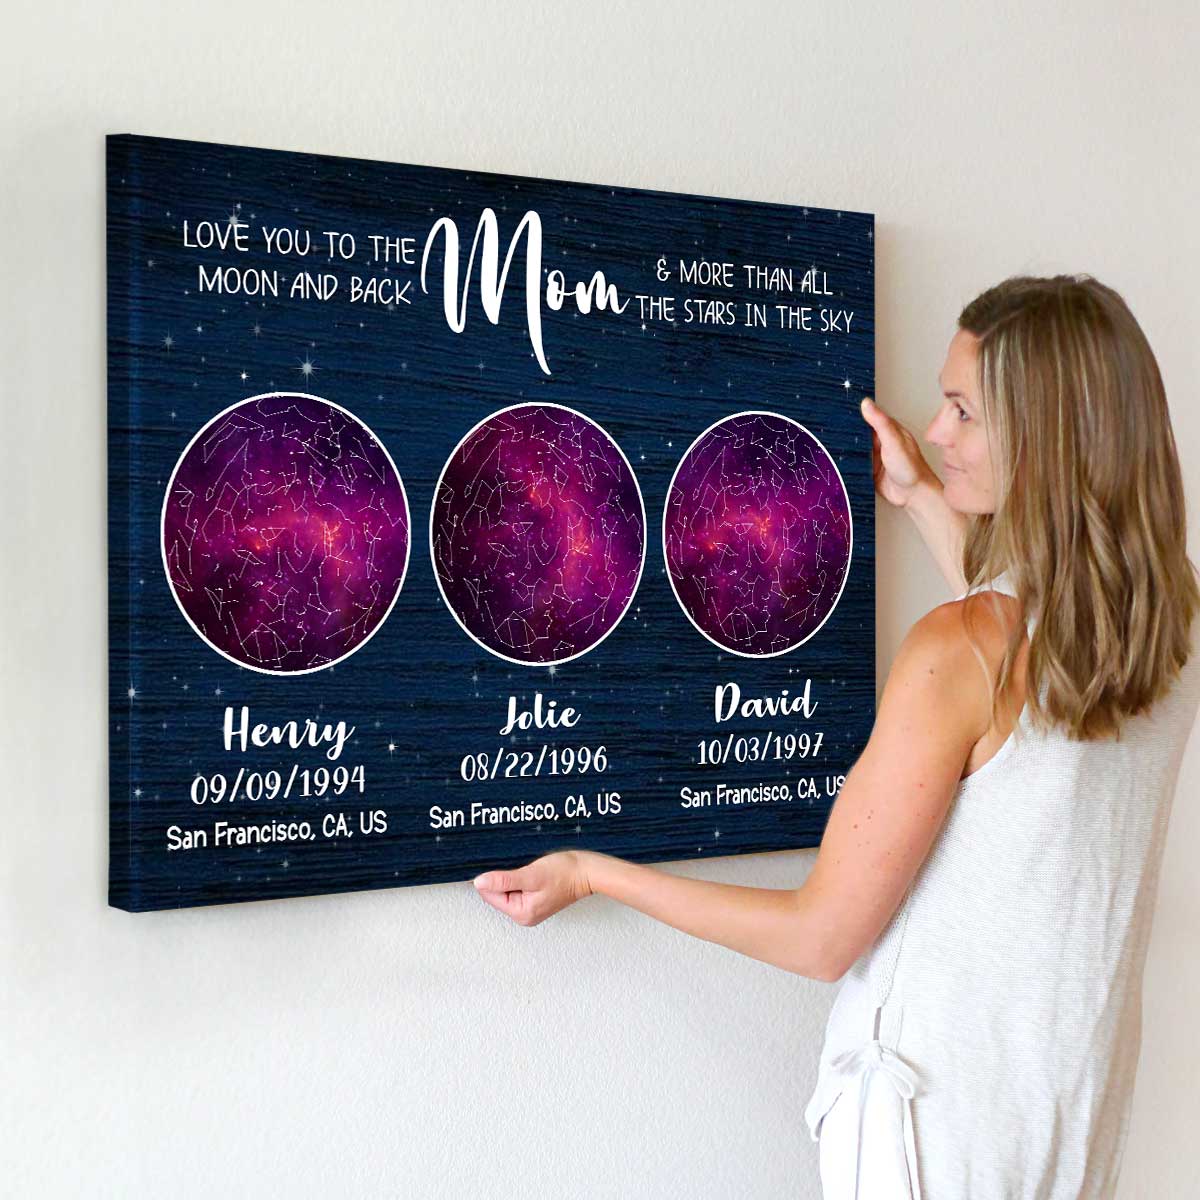 https://benicee.com/wp-content/uploads/2022/09/8641c66a-3a50-11ed-94d0-366e99cc6050__Personalized-Constellation-Map-Christmas-Gift-for-Mom-2-or-3-Children-Star-Map-Gift-for-Mom-from-Daughter-2201.jpg